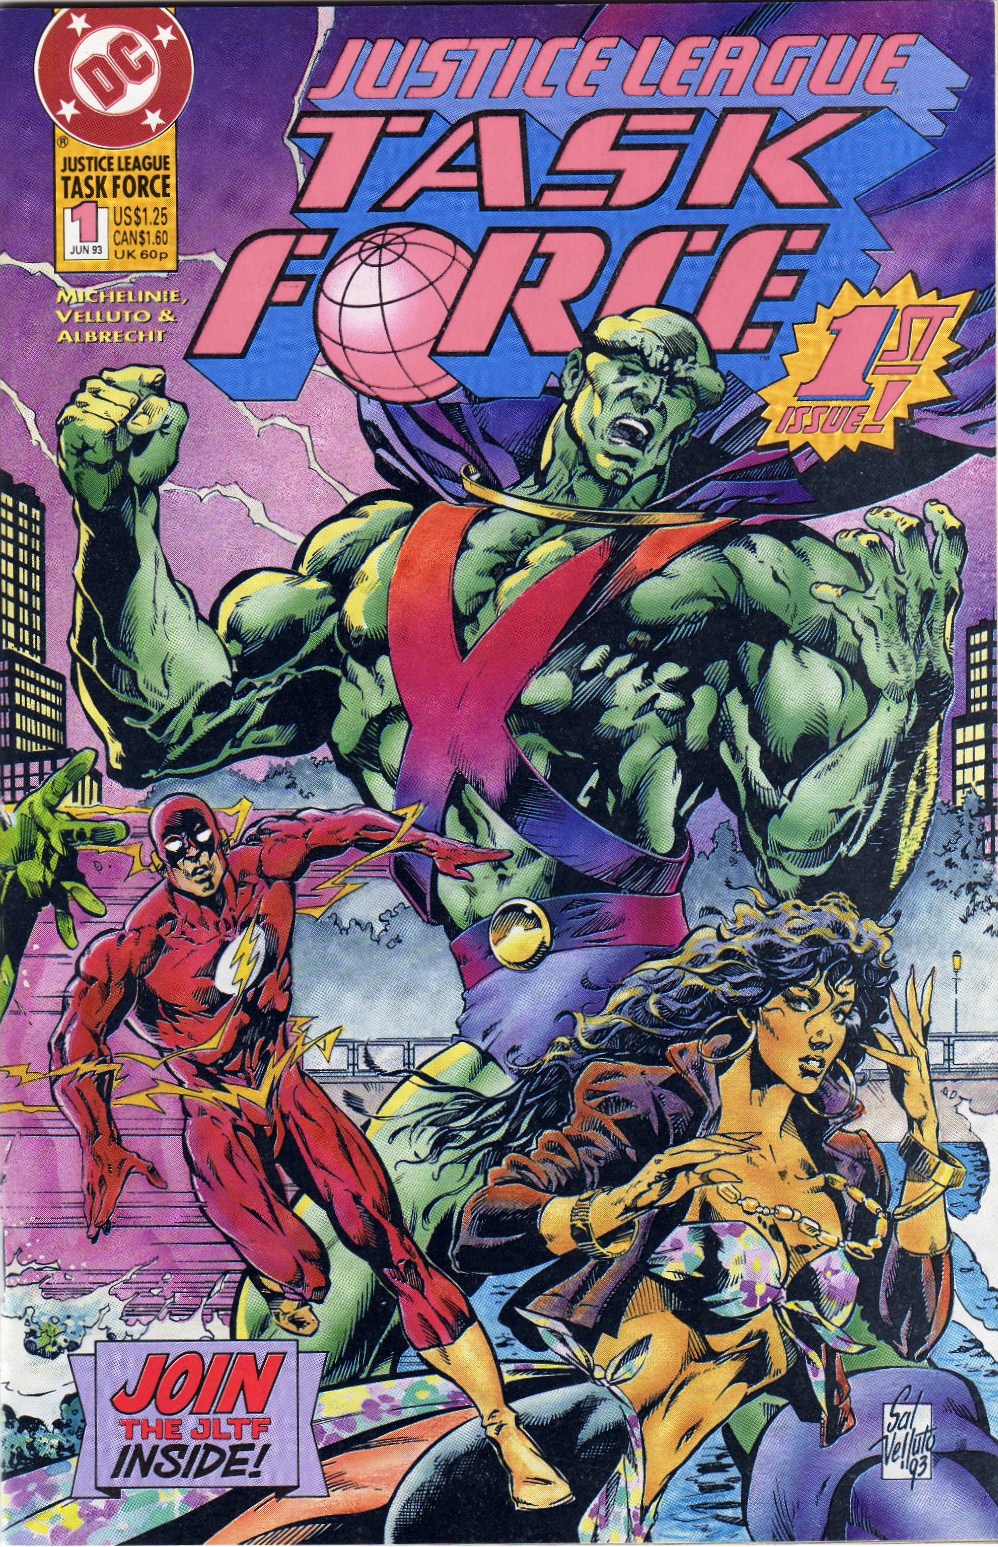 From Justice League Task Force #1 (1993) Cover